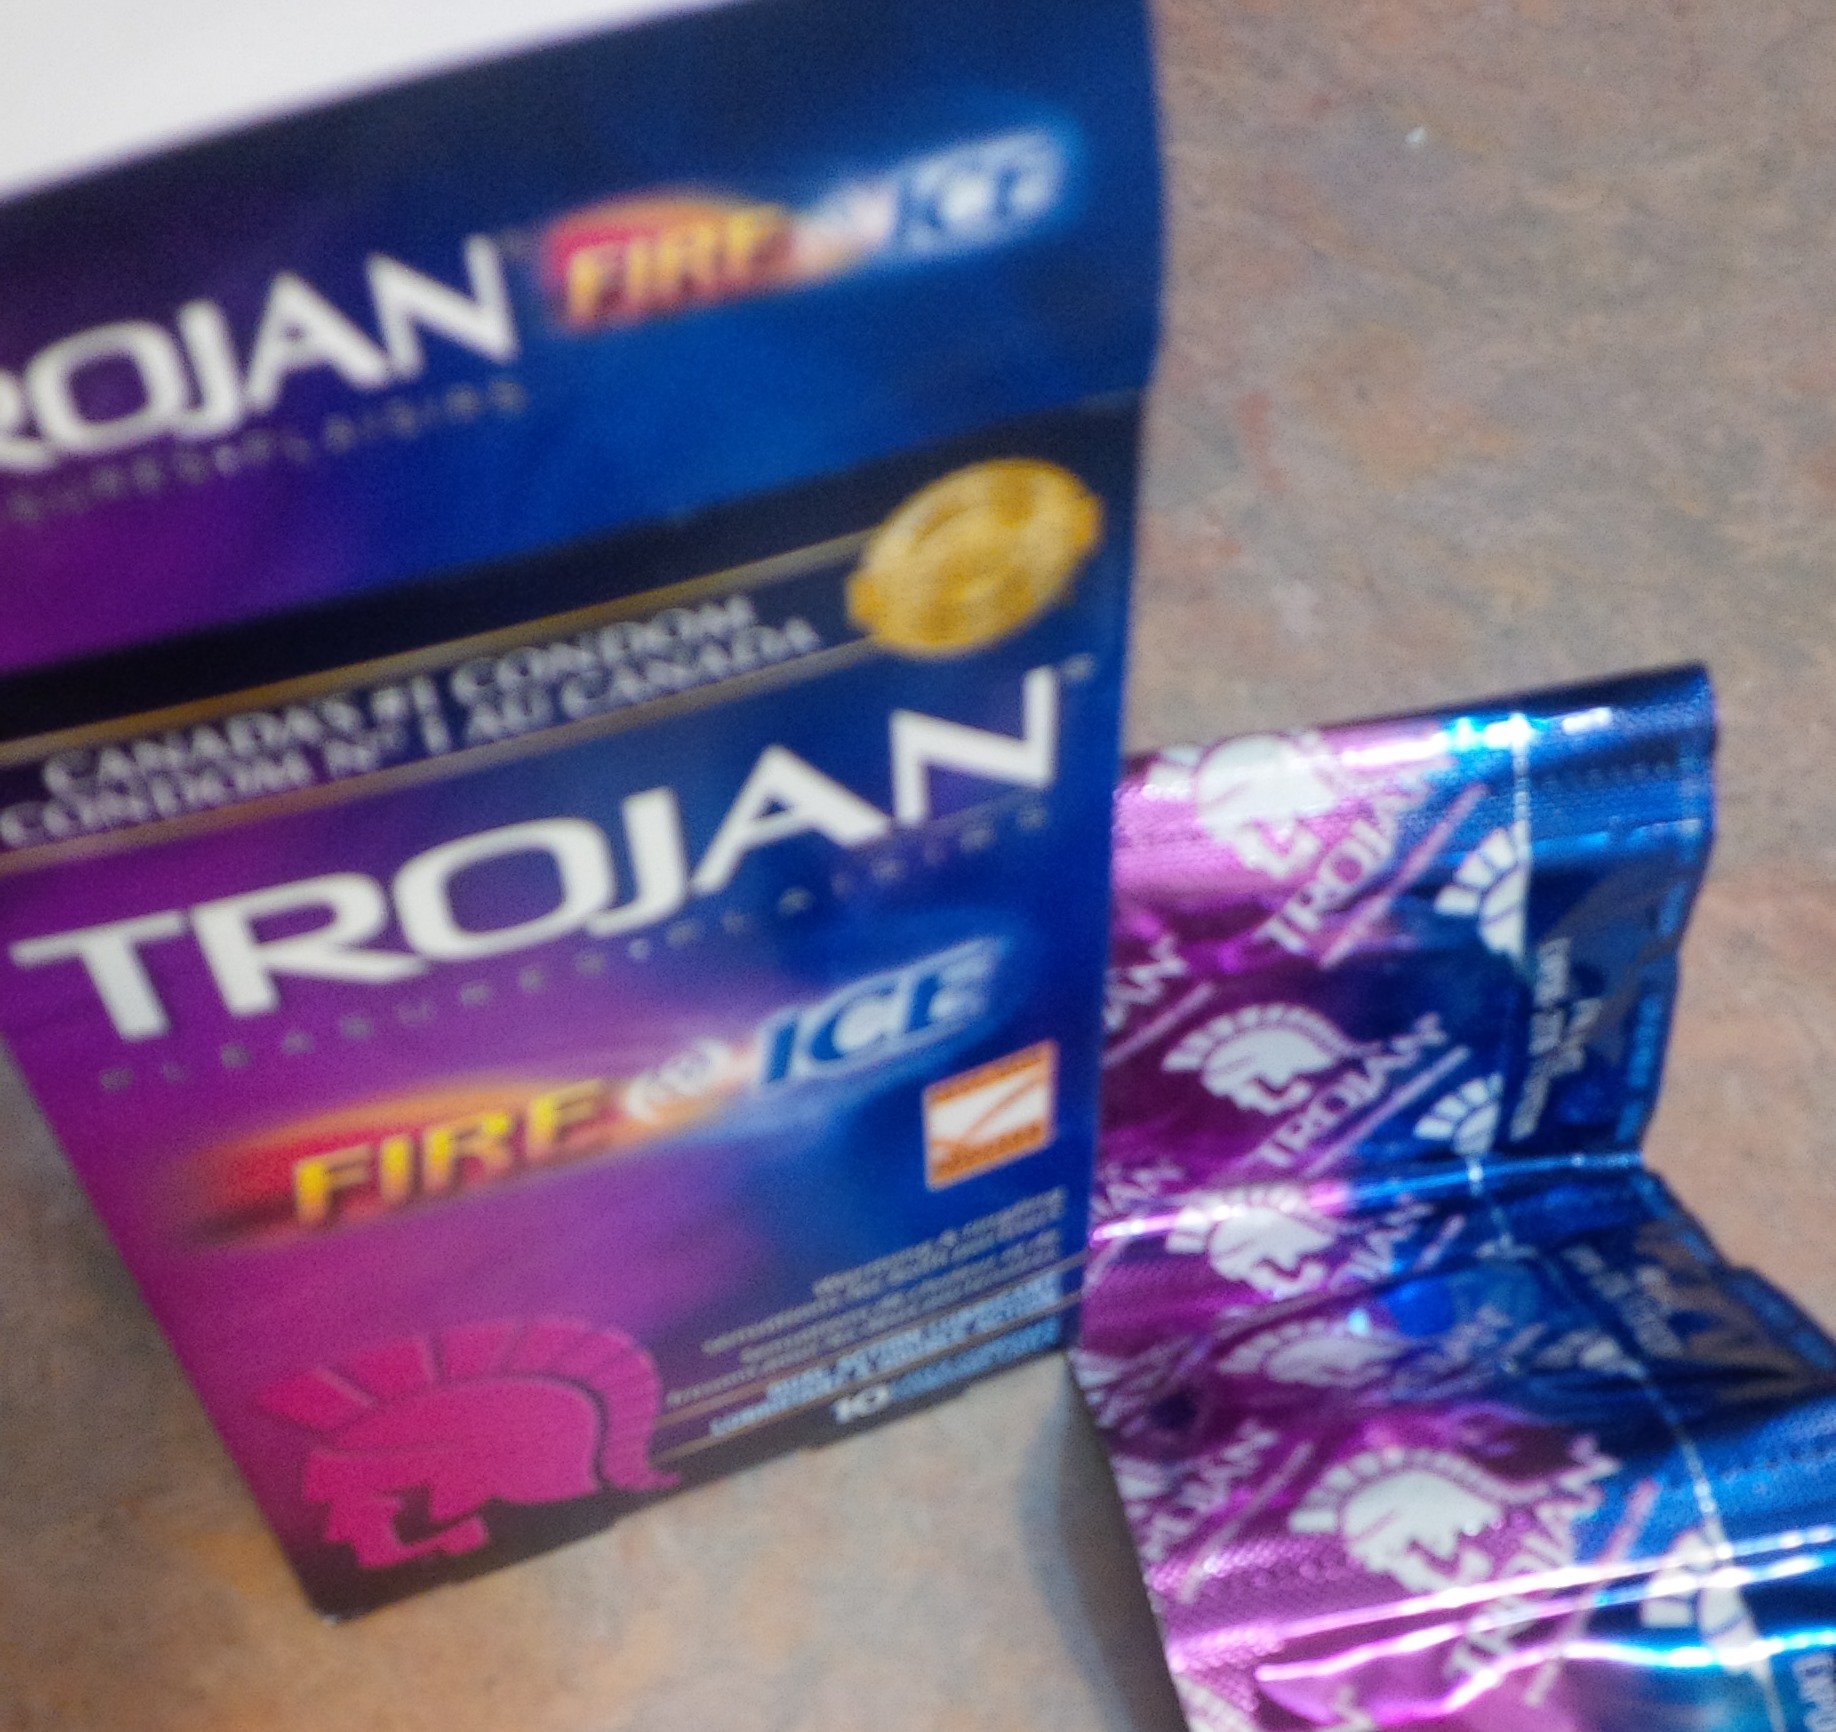 Time buy first to what condoms The Ultimate